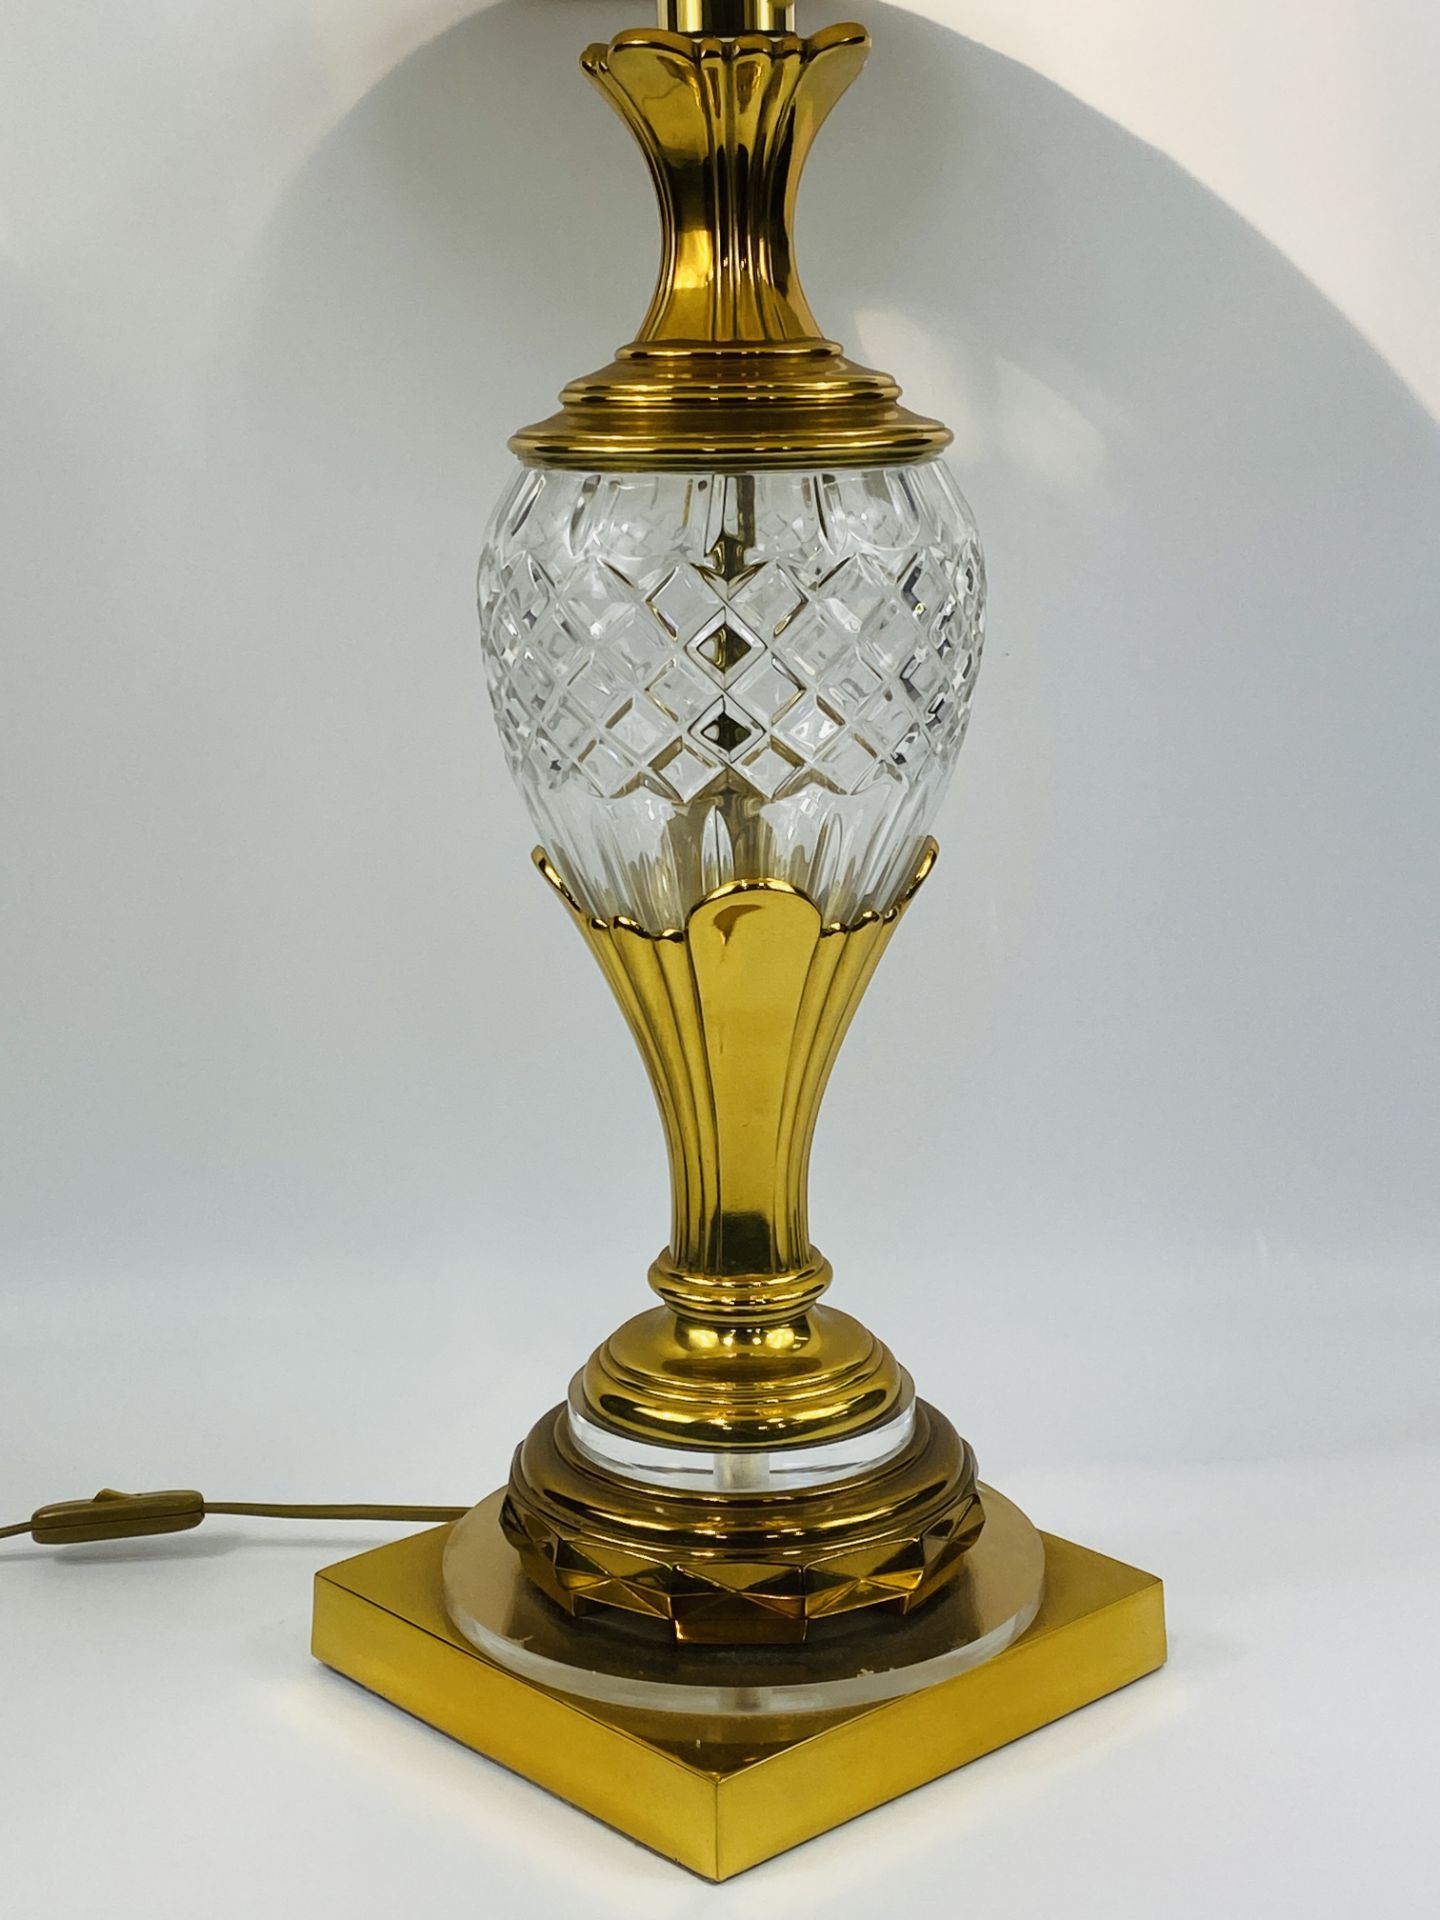 Pair of glass table lamps - Image 3 of 5